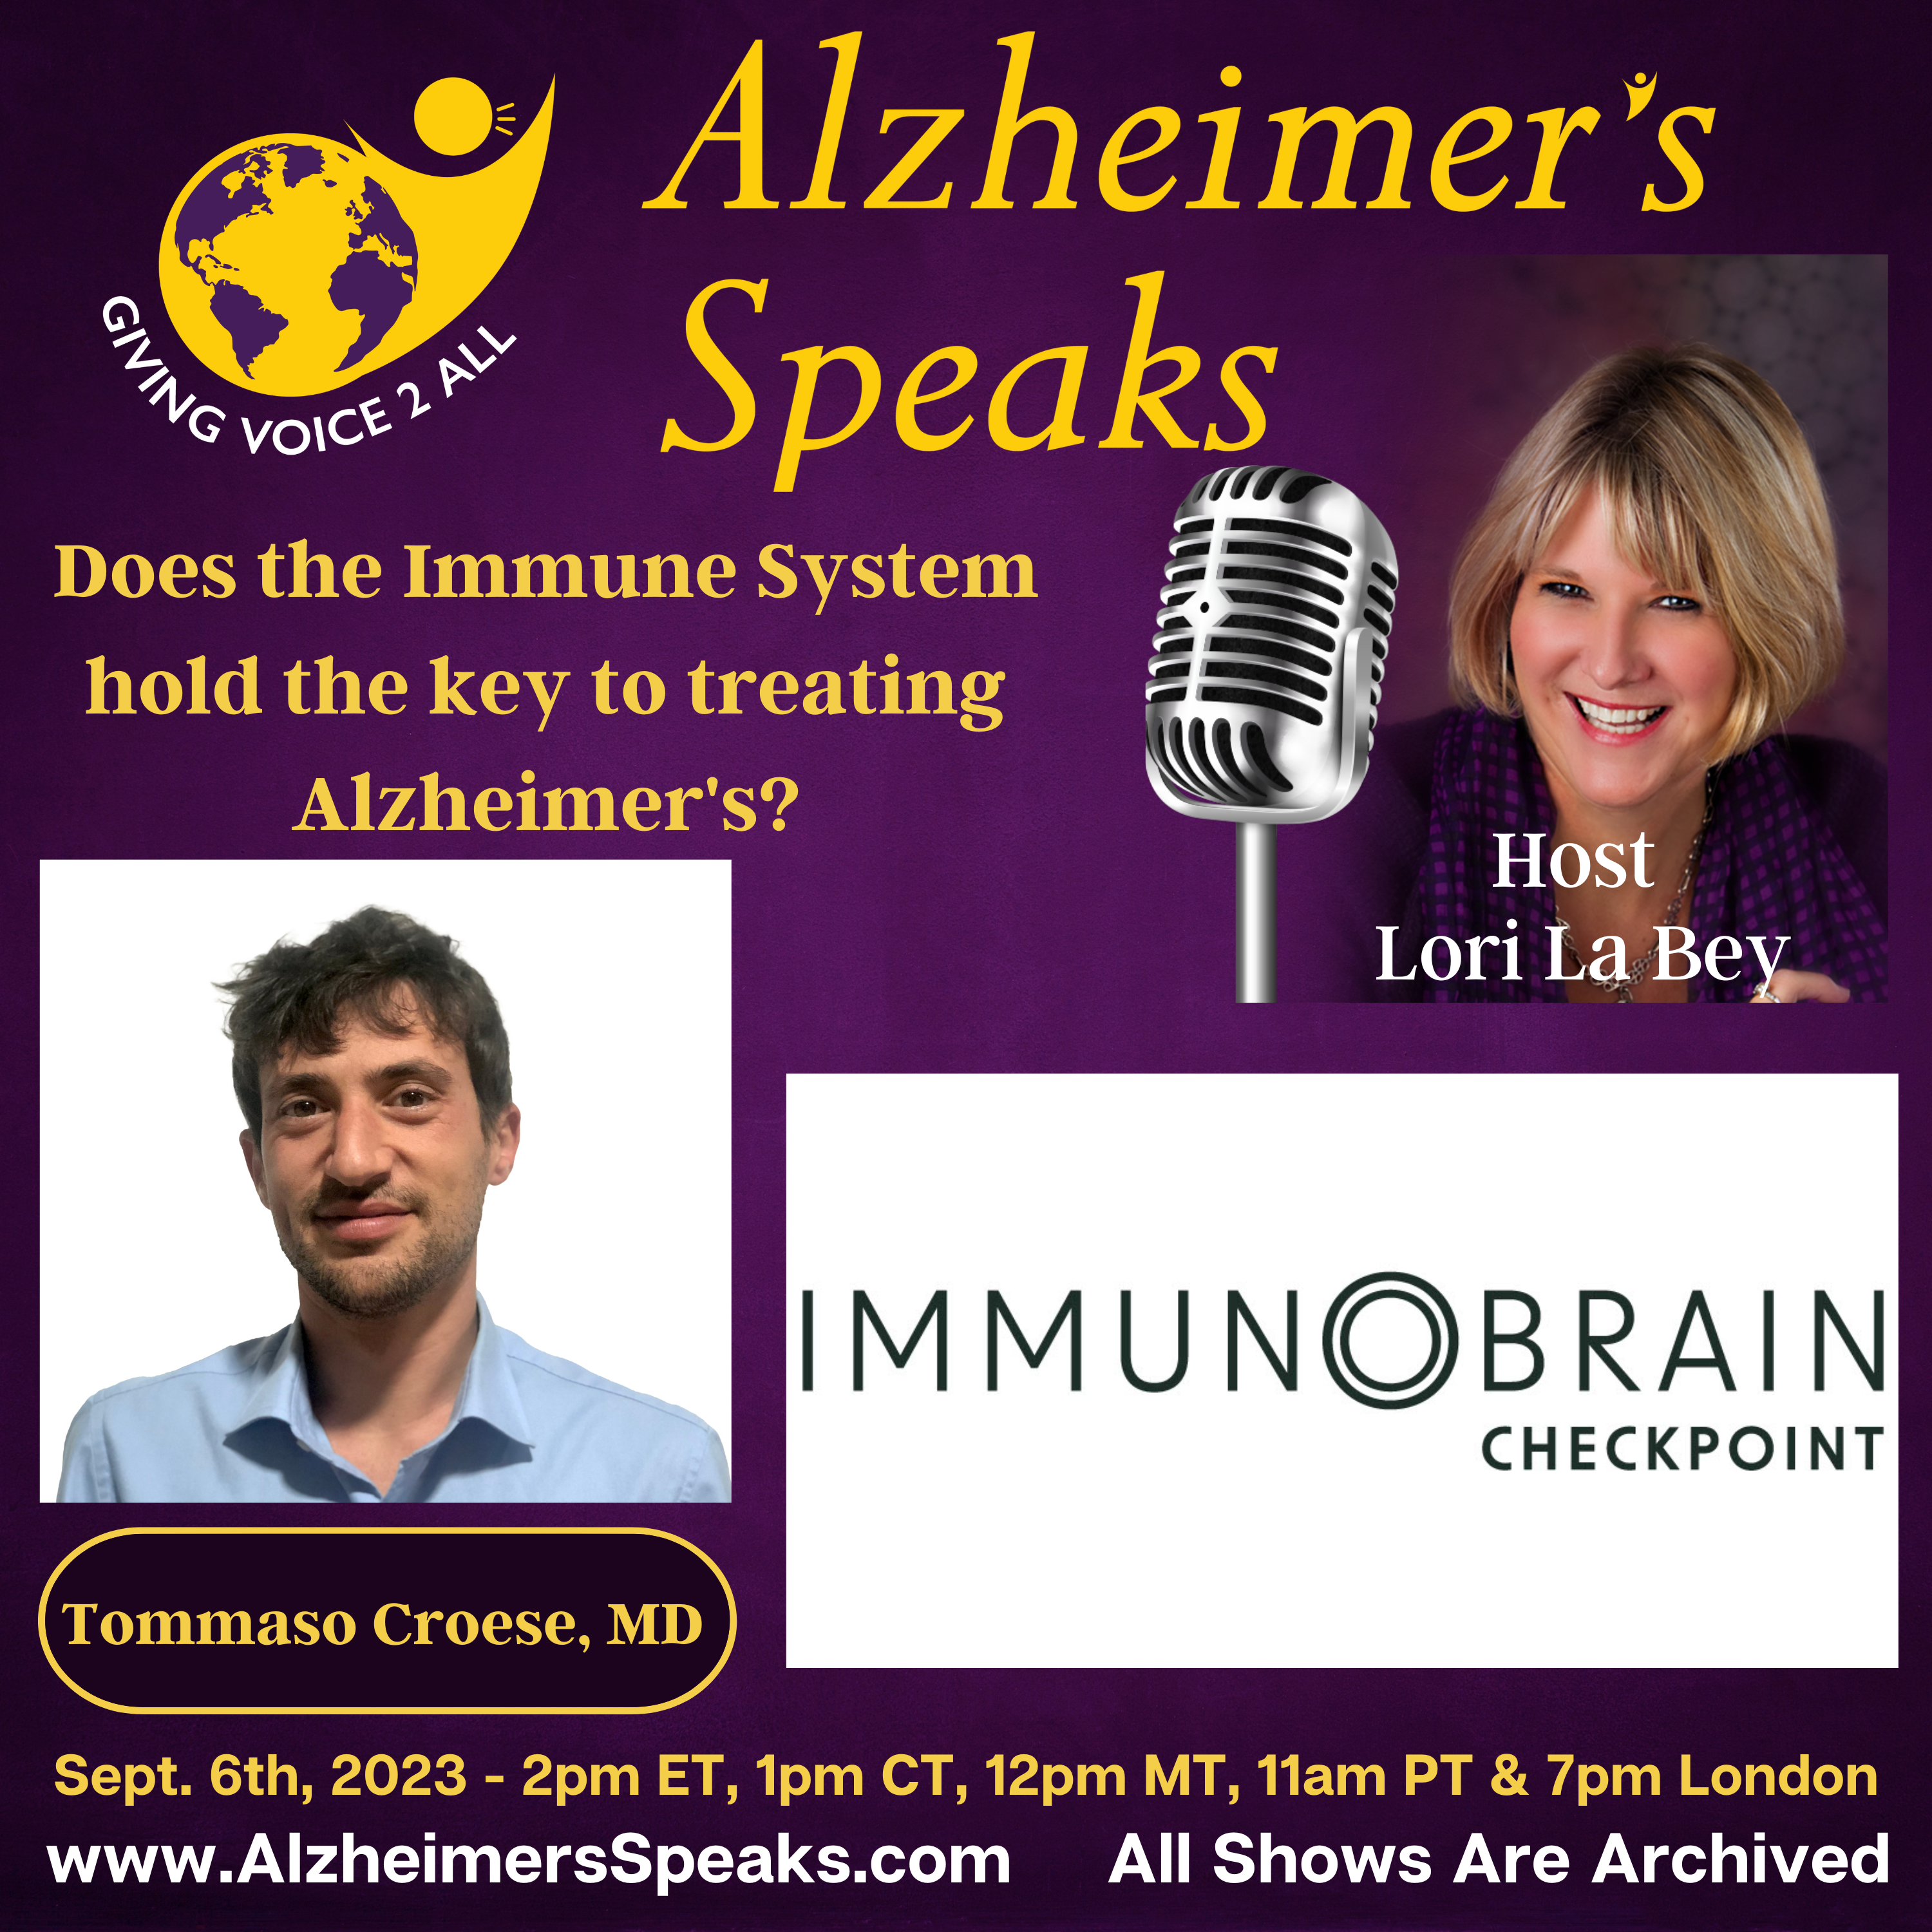 Does the Immune System Hold the Key to Treating Alzheimer's?